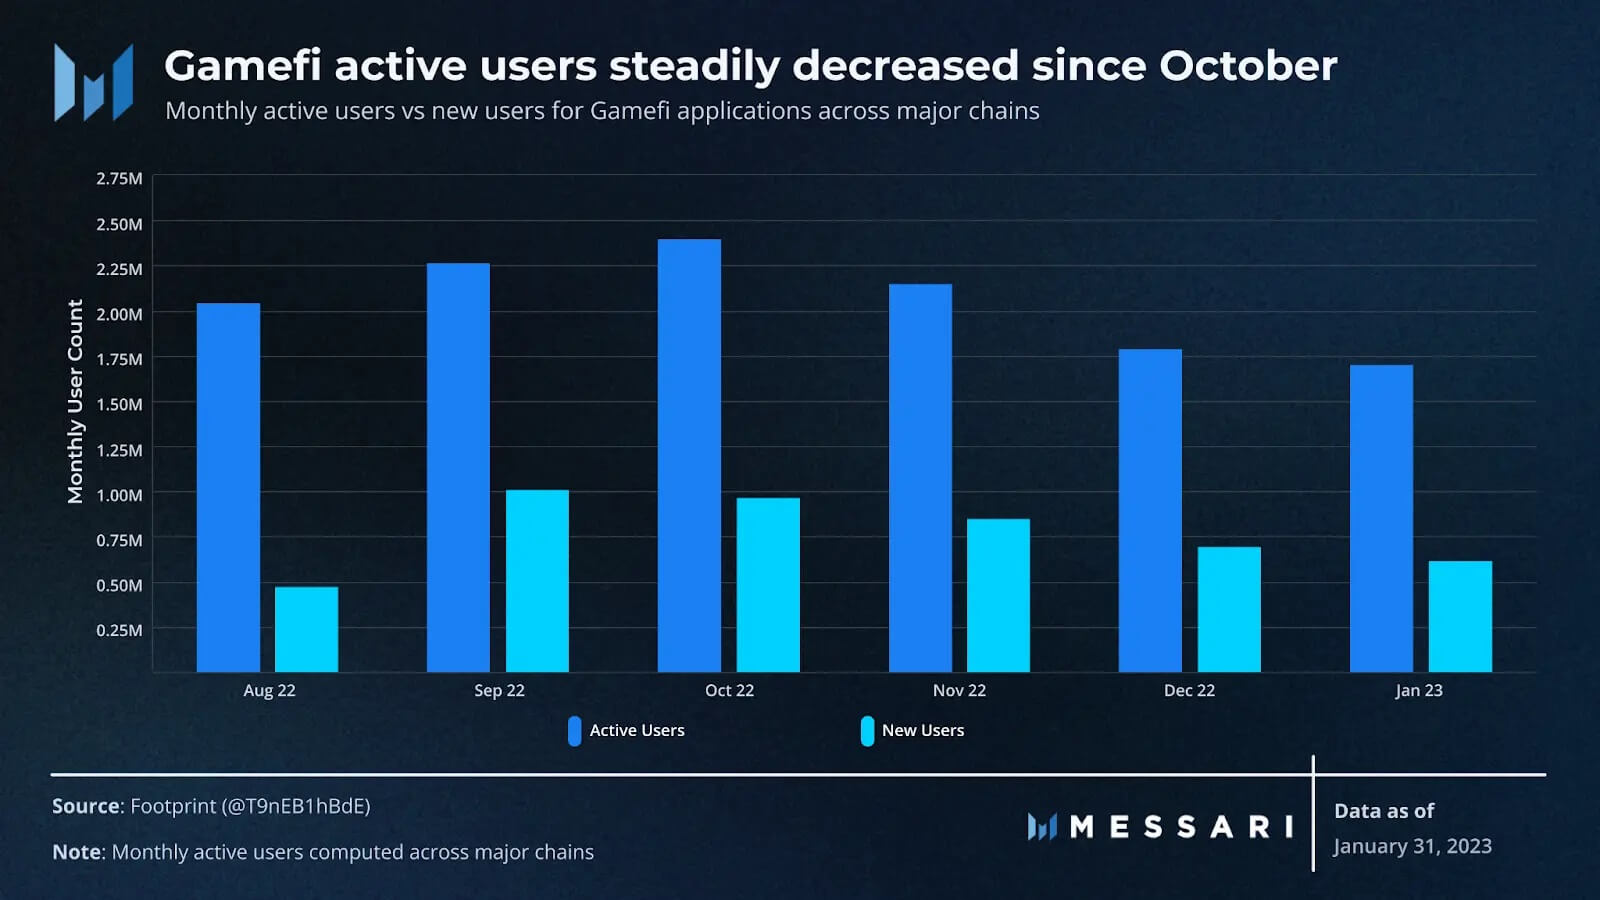 Gamefi active users steadily decreased since October (Source: Messari Crypto)